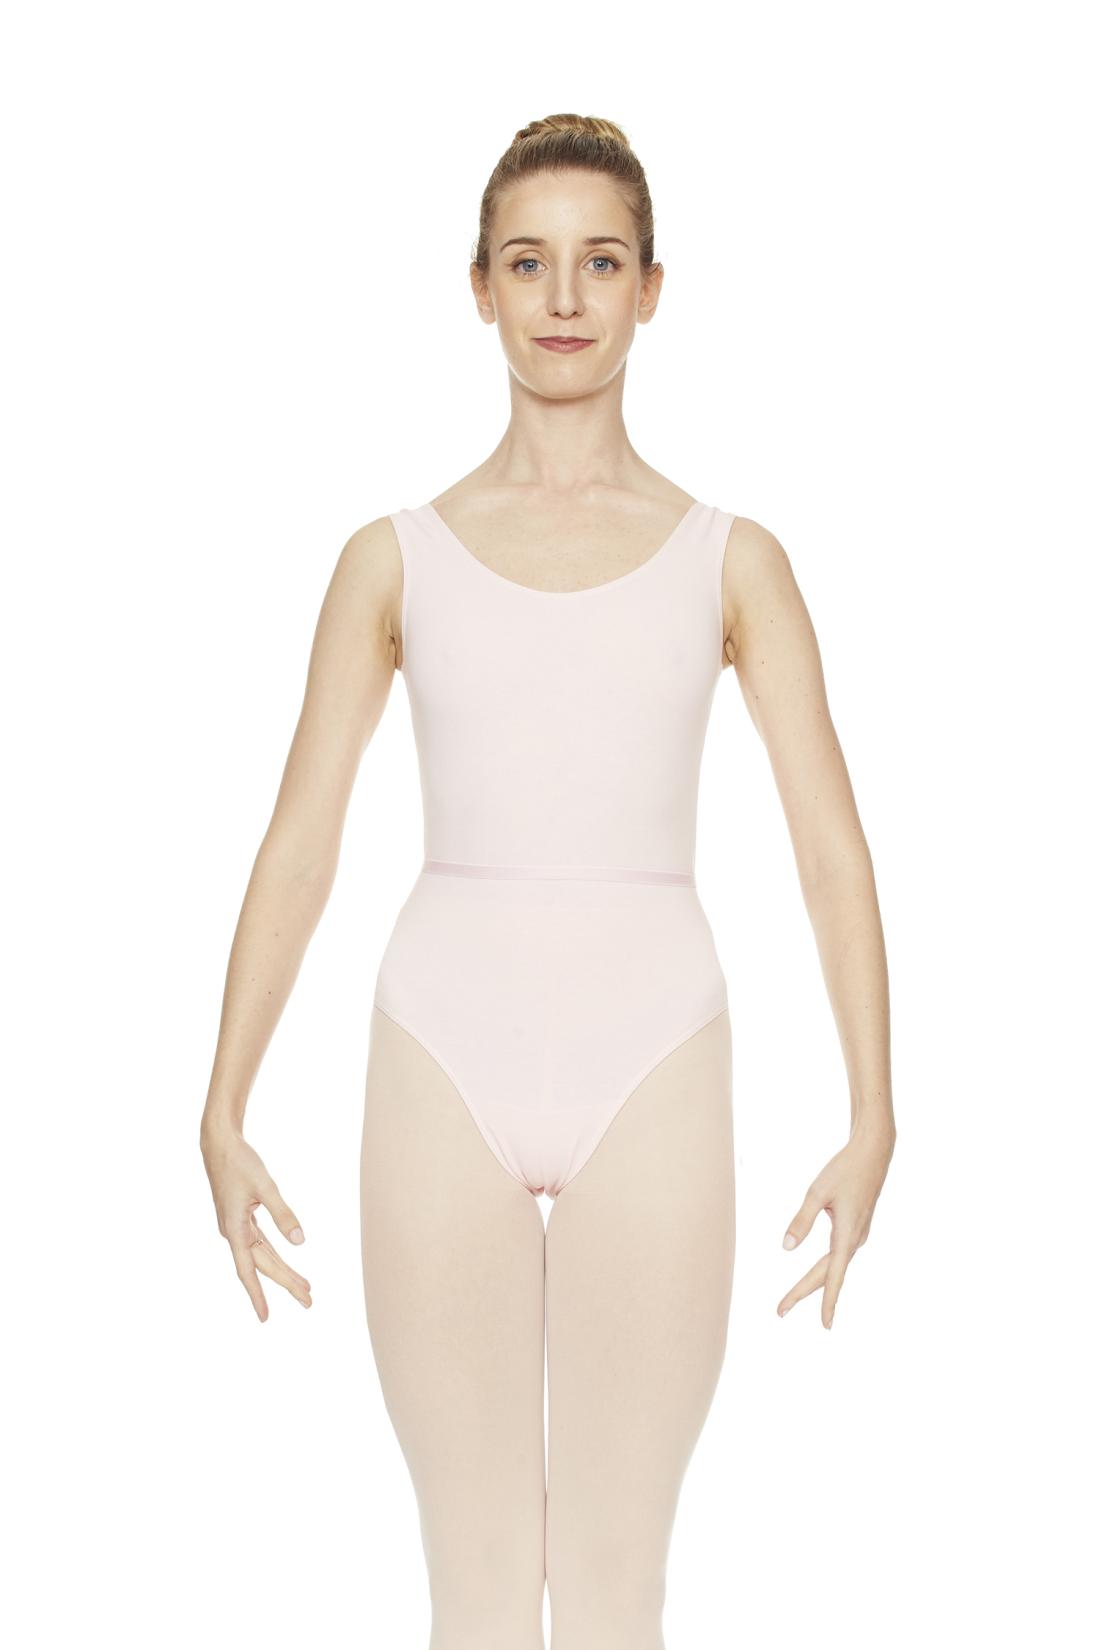 Classic ballet leotard with matching belt for girls in Cotton fabric Intermezzo dance